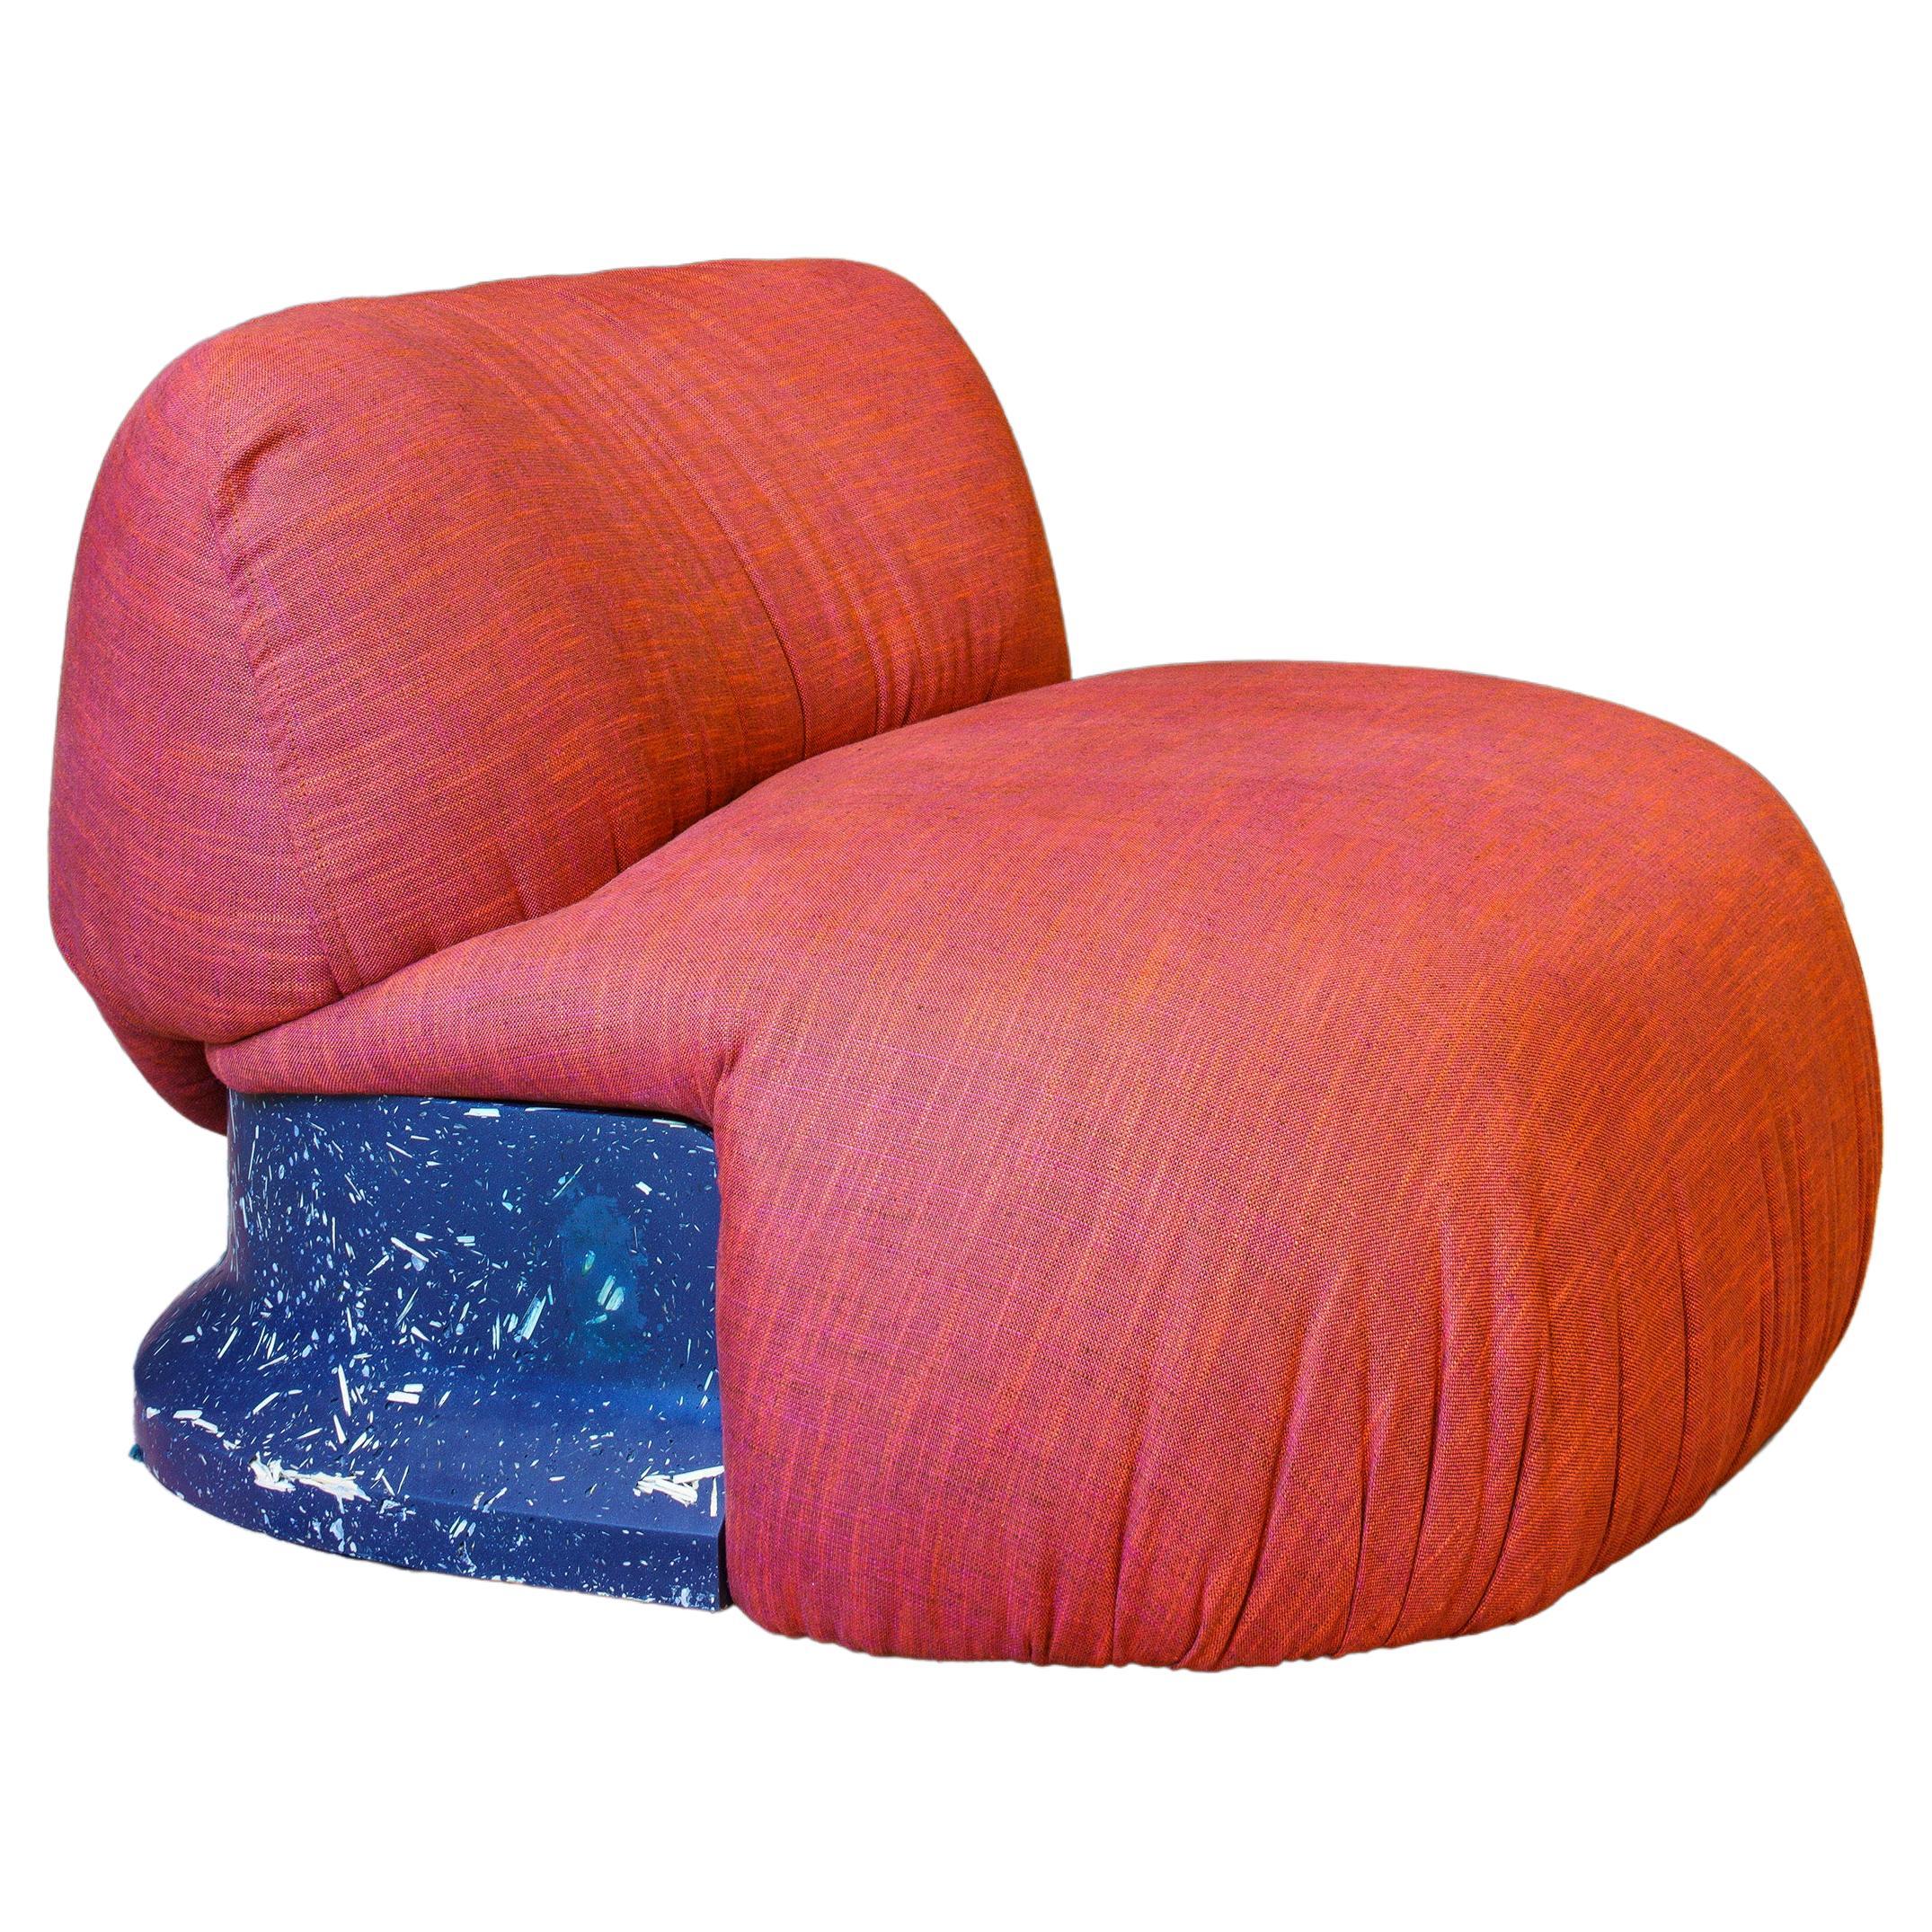 Red Fabric, Blue Resin Base Sima Armchair by Andrea Steidl for Delvis Unlimited